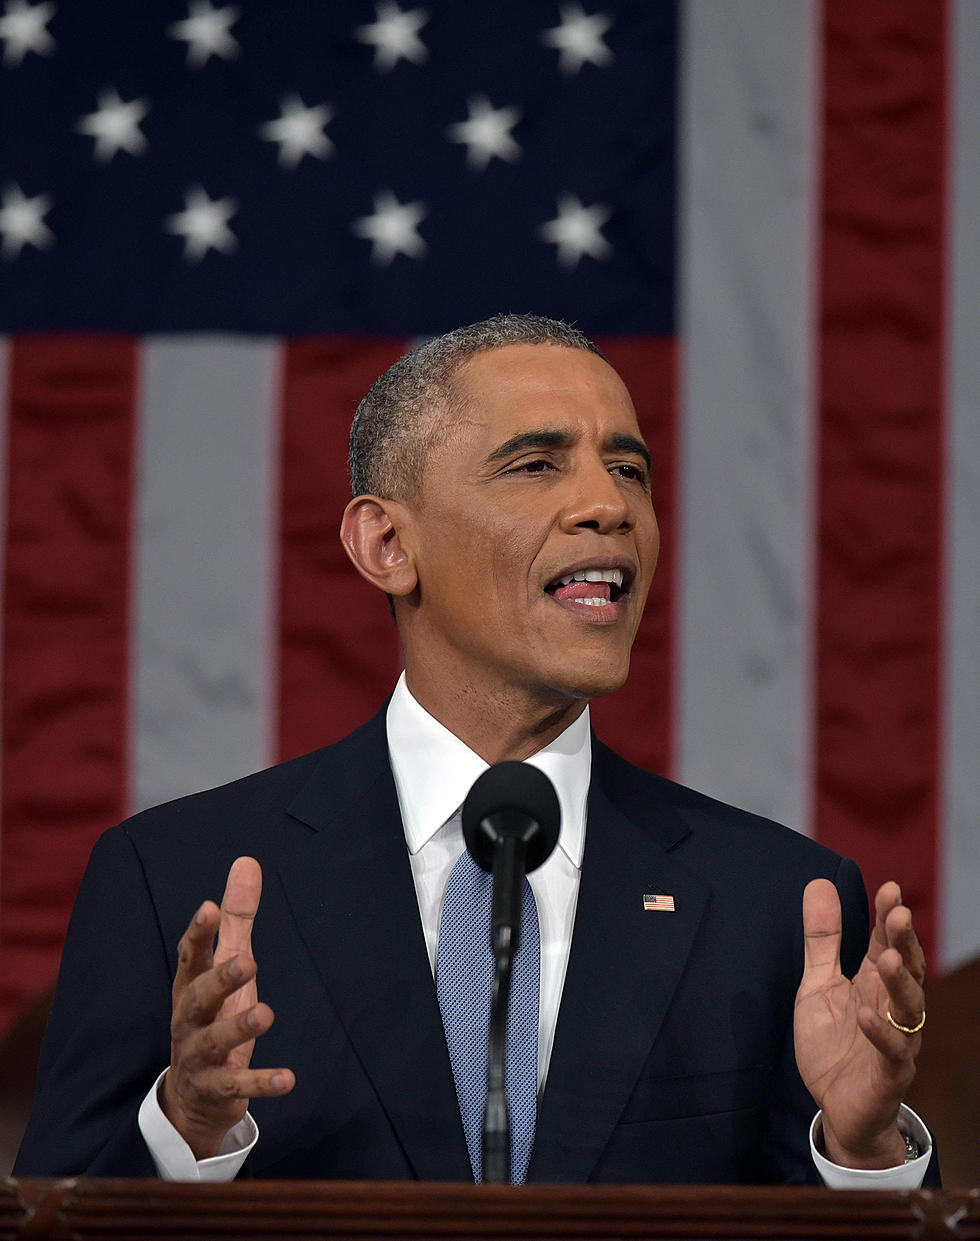 See President Obama’s State of the Union Address [VIDEO]